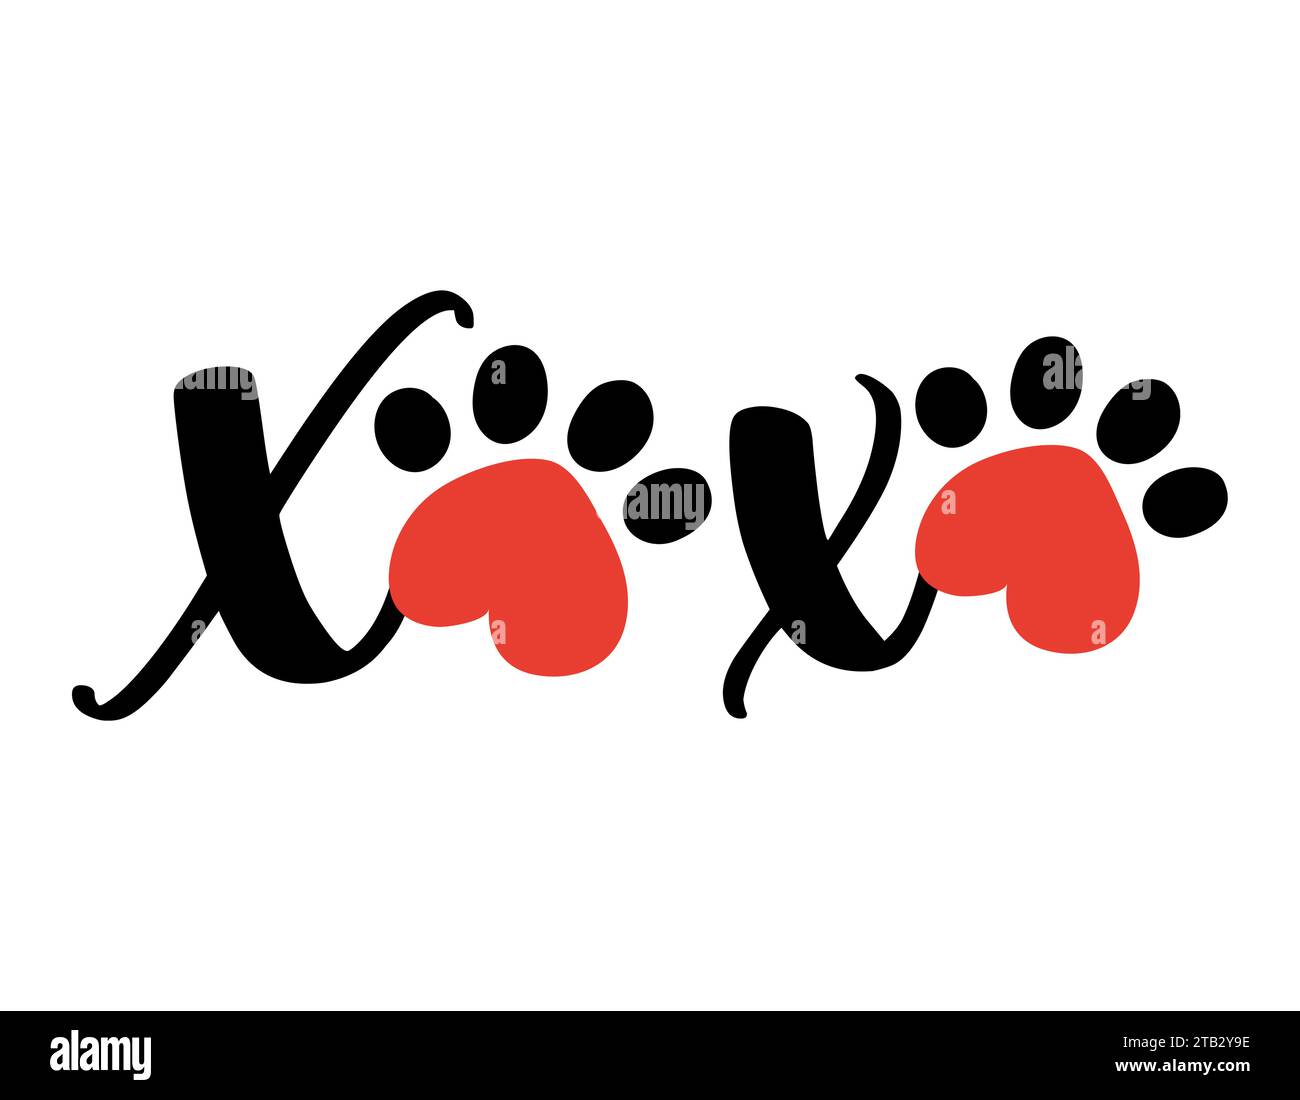 XOXO (hugs and kisses) - Adorable calligraphy phrase for Valentine day. Hand drawn lettering for Lovely greetings cards, invitations. Good for t-shirt Stock Vector